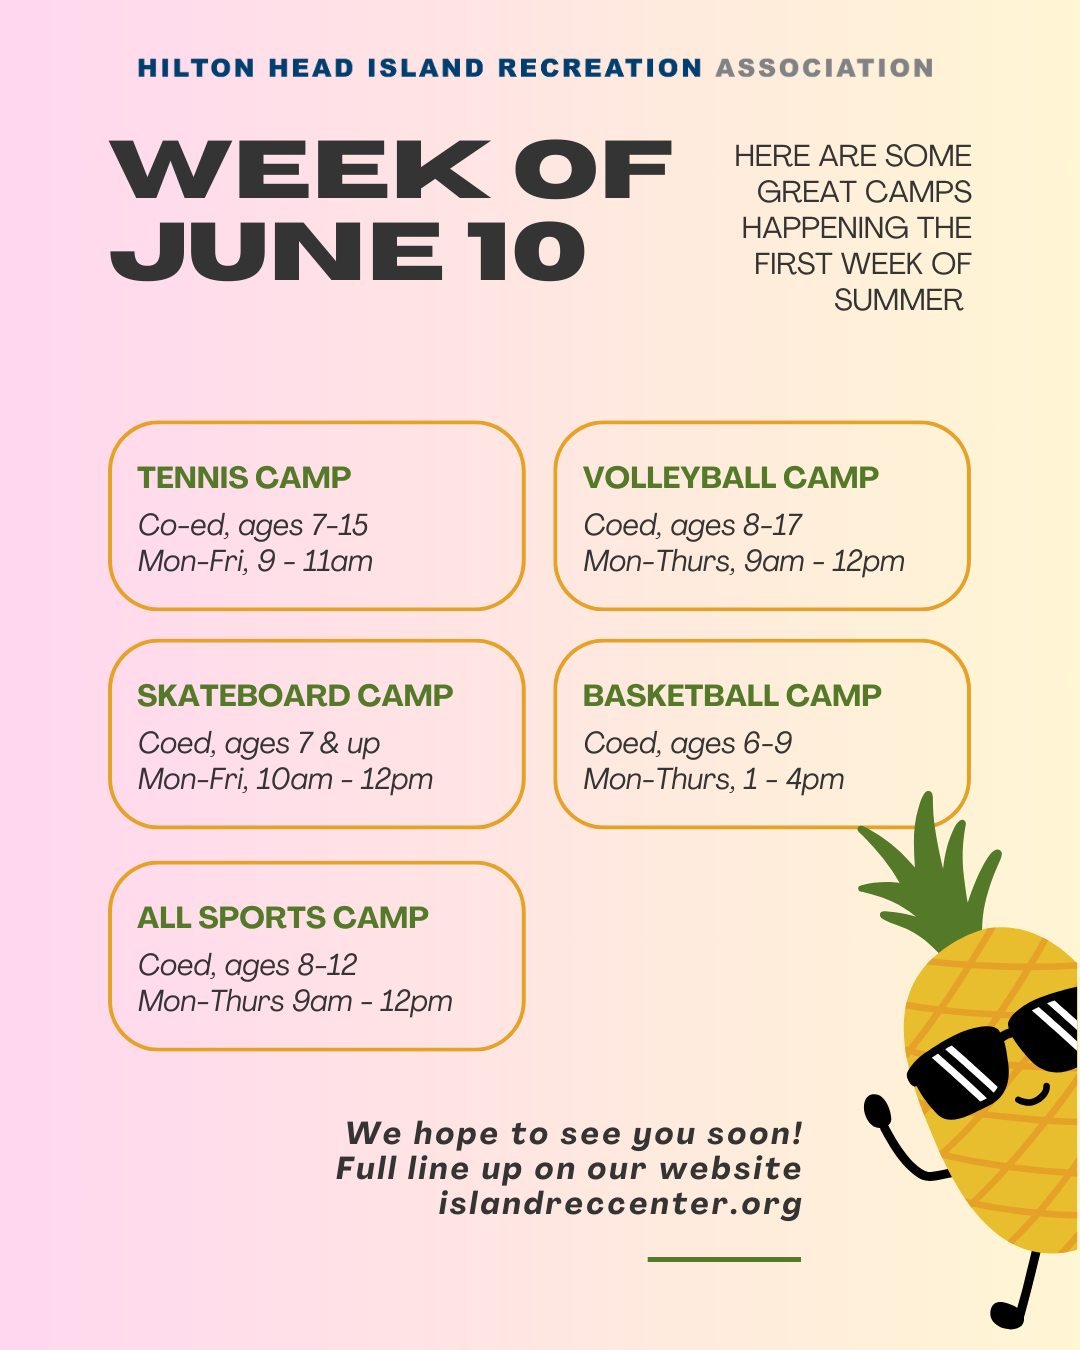 Time is flyingggggg by and we are ready for it! Check out the camps we are offering the first week of summer. For more details and to register: islandrecenter.org/summer-sports